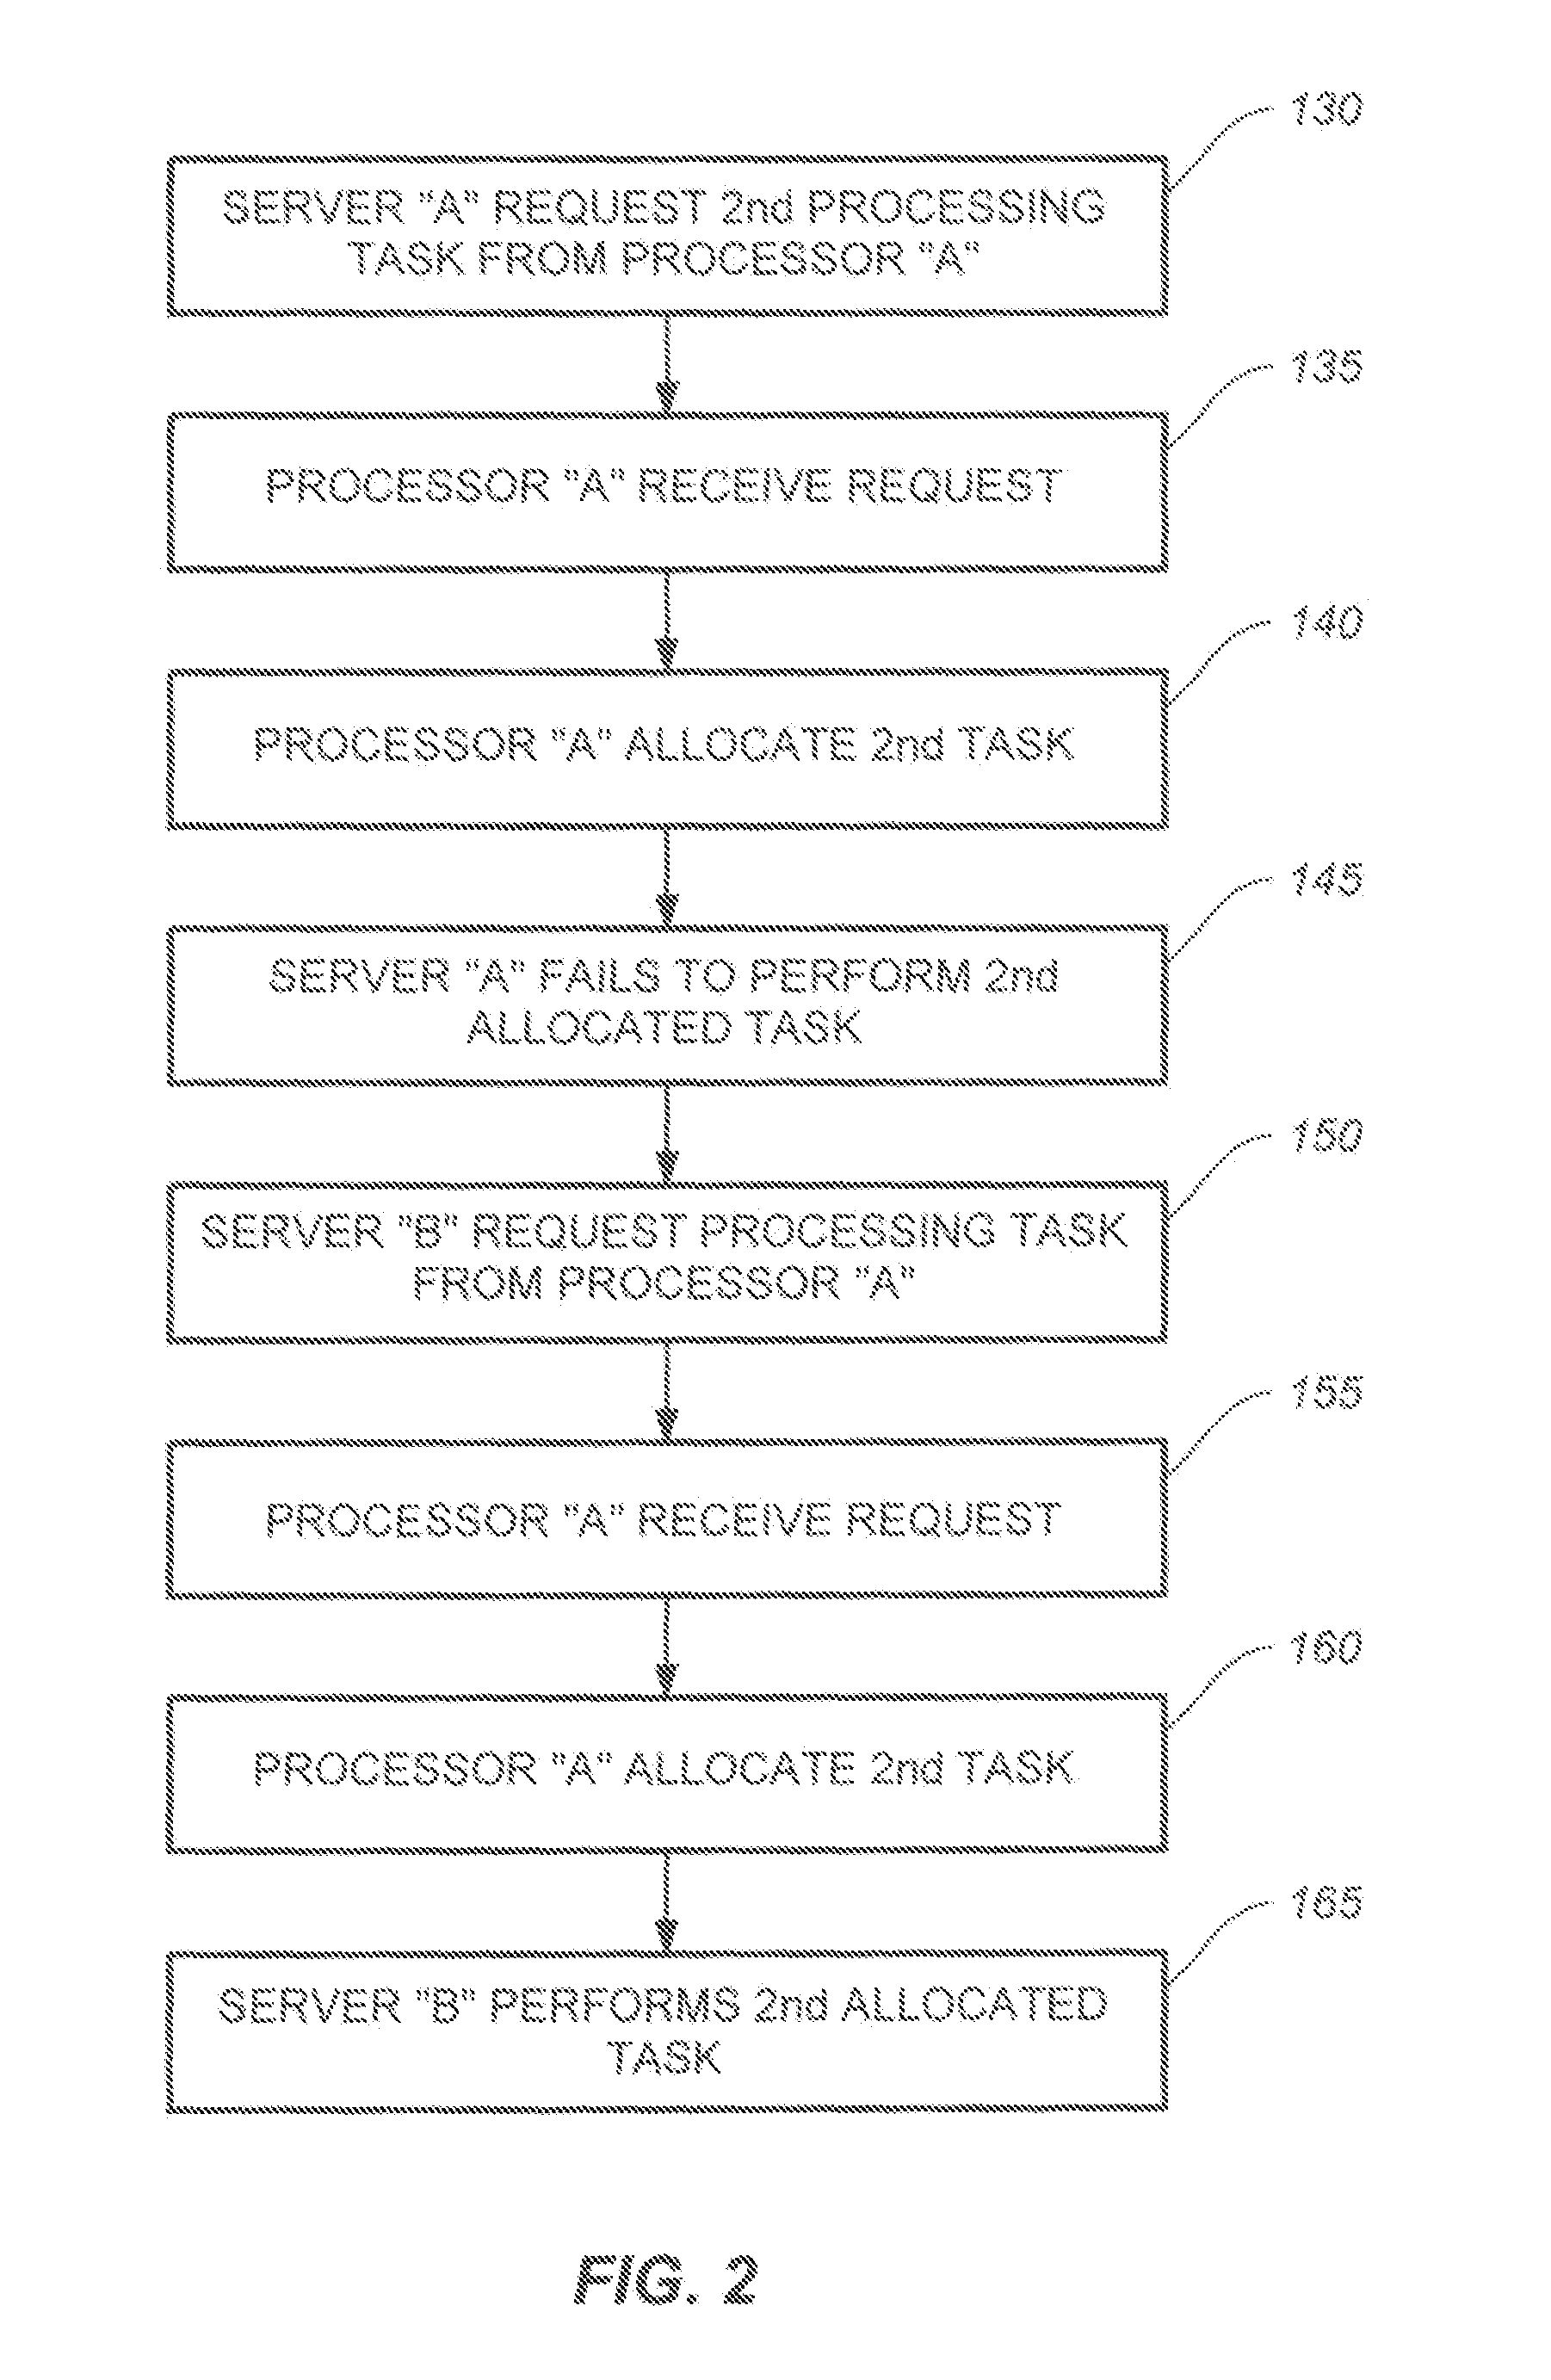 Task allocation in a computer network